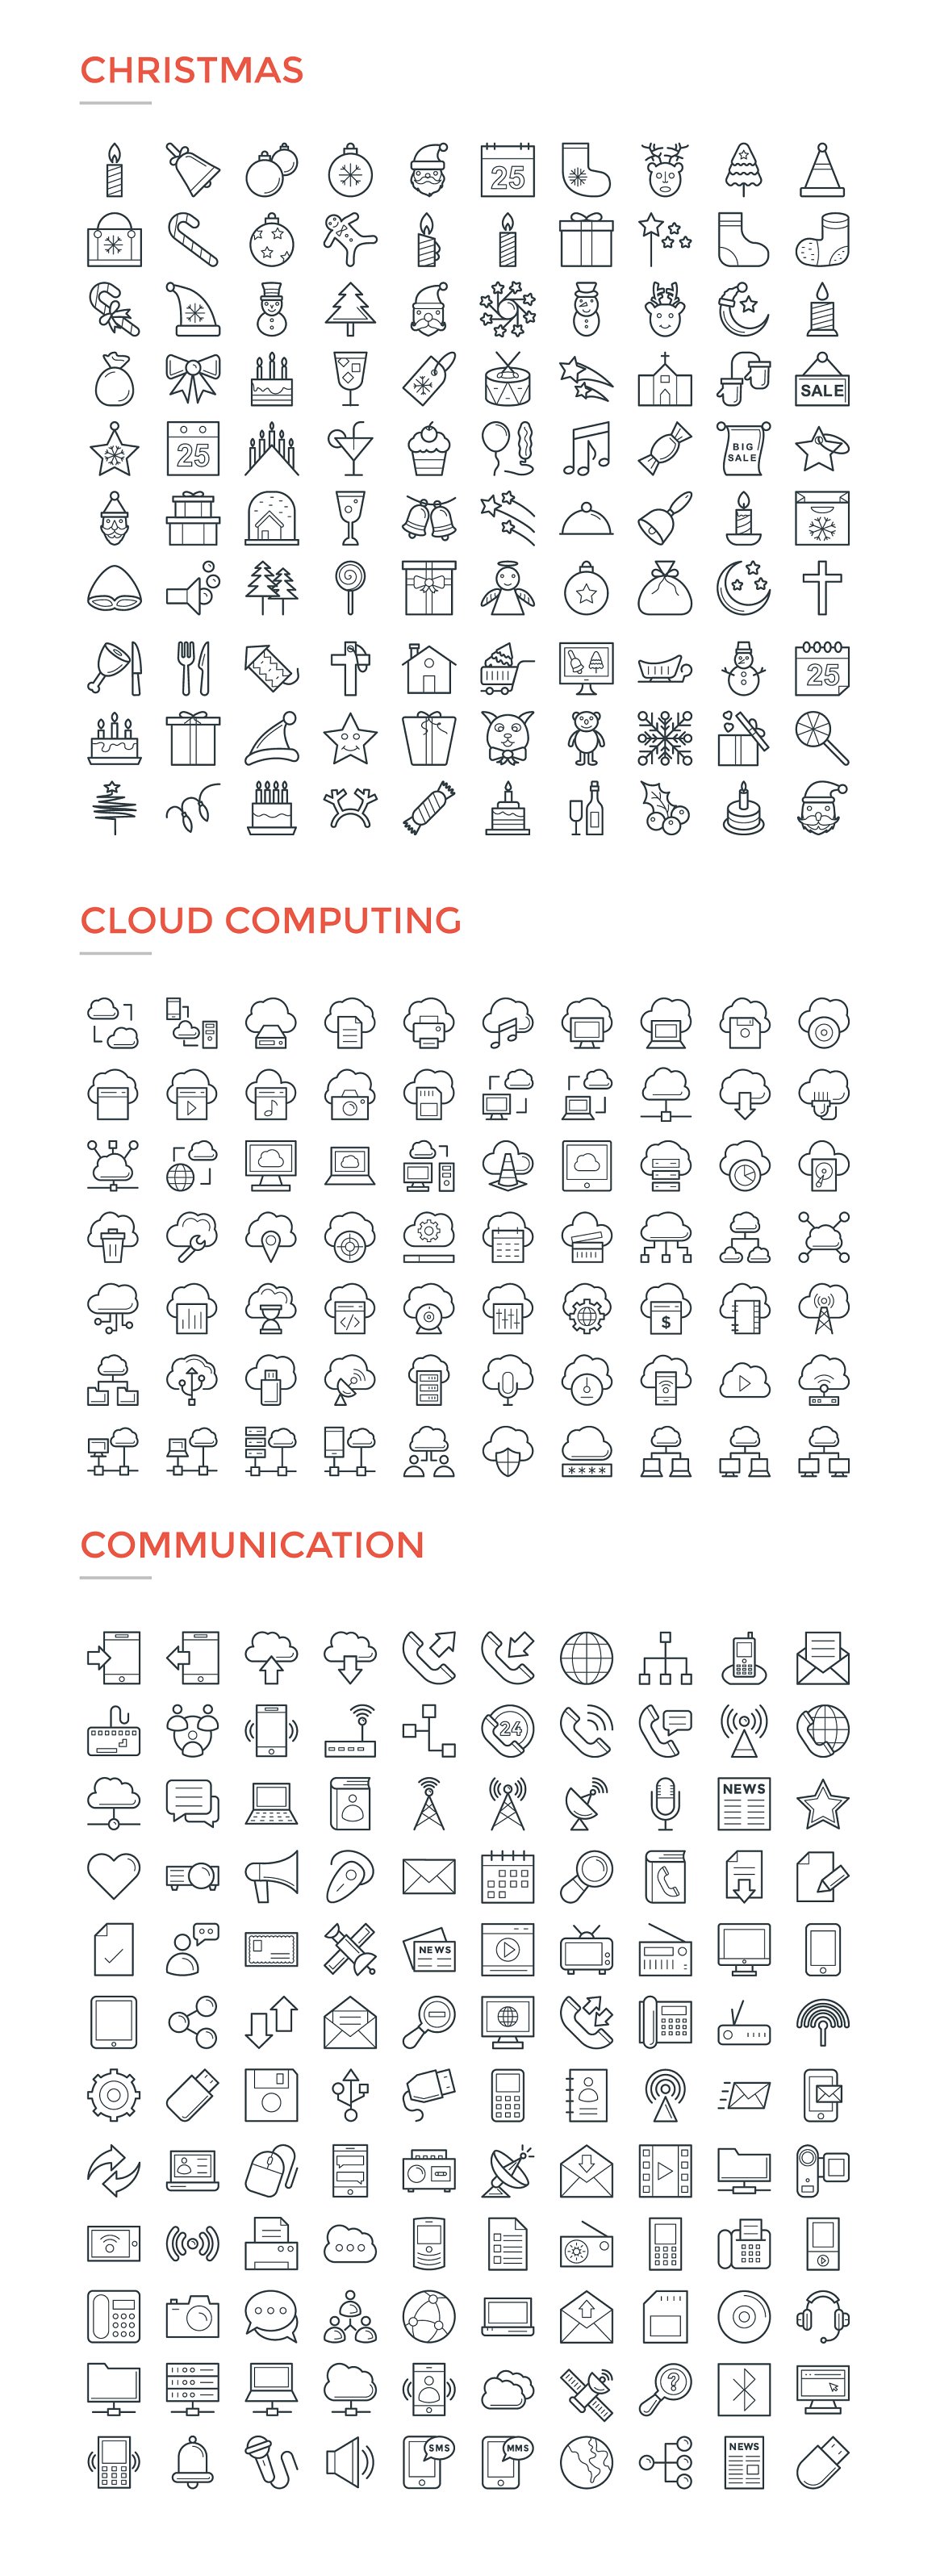 A set of christmas, cloud computing and communication icons on a white background.